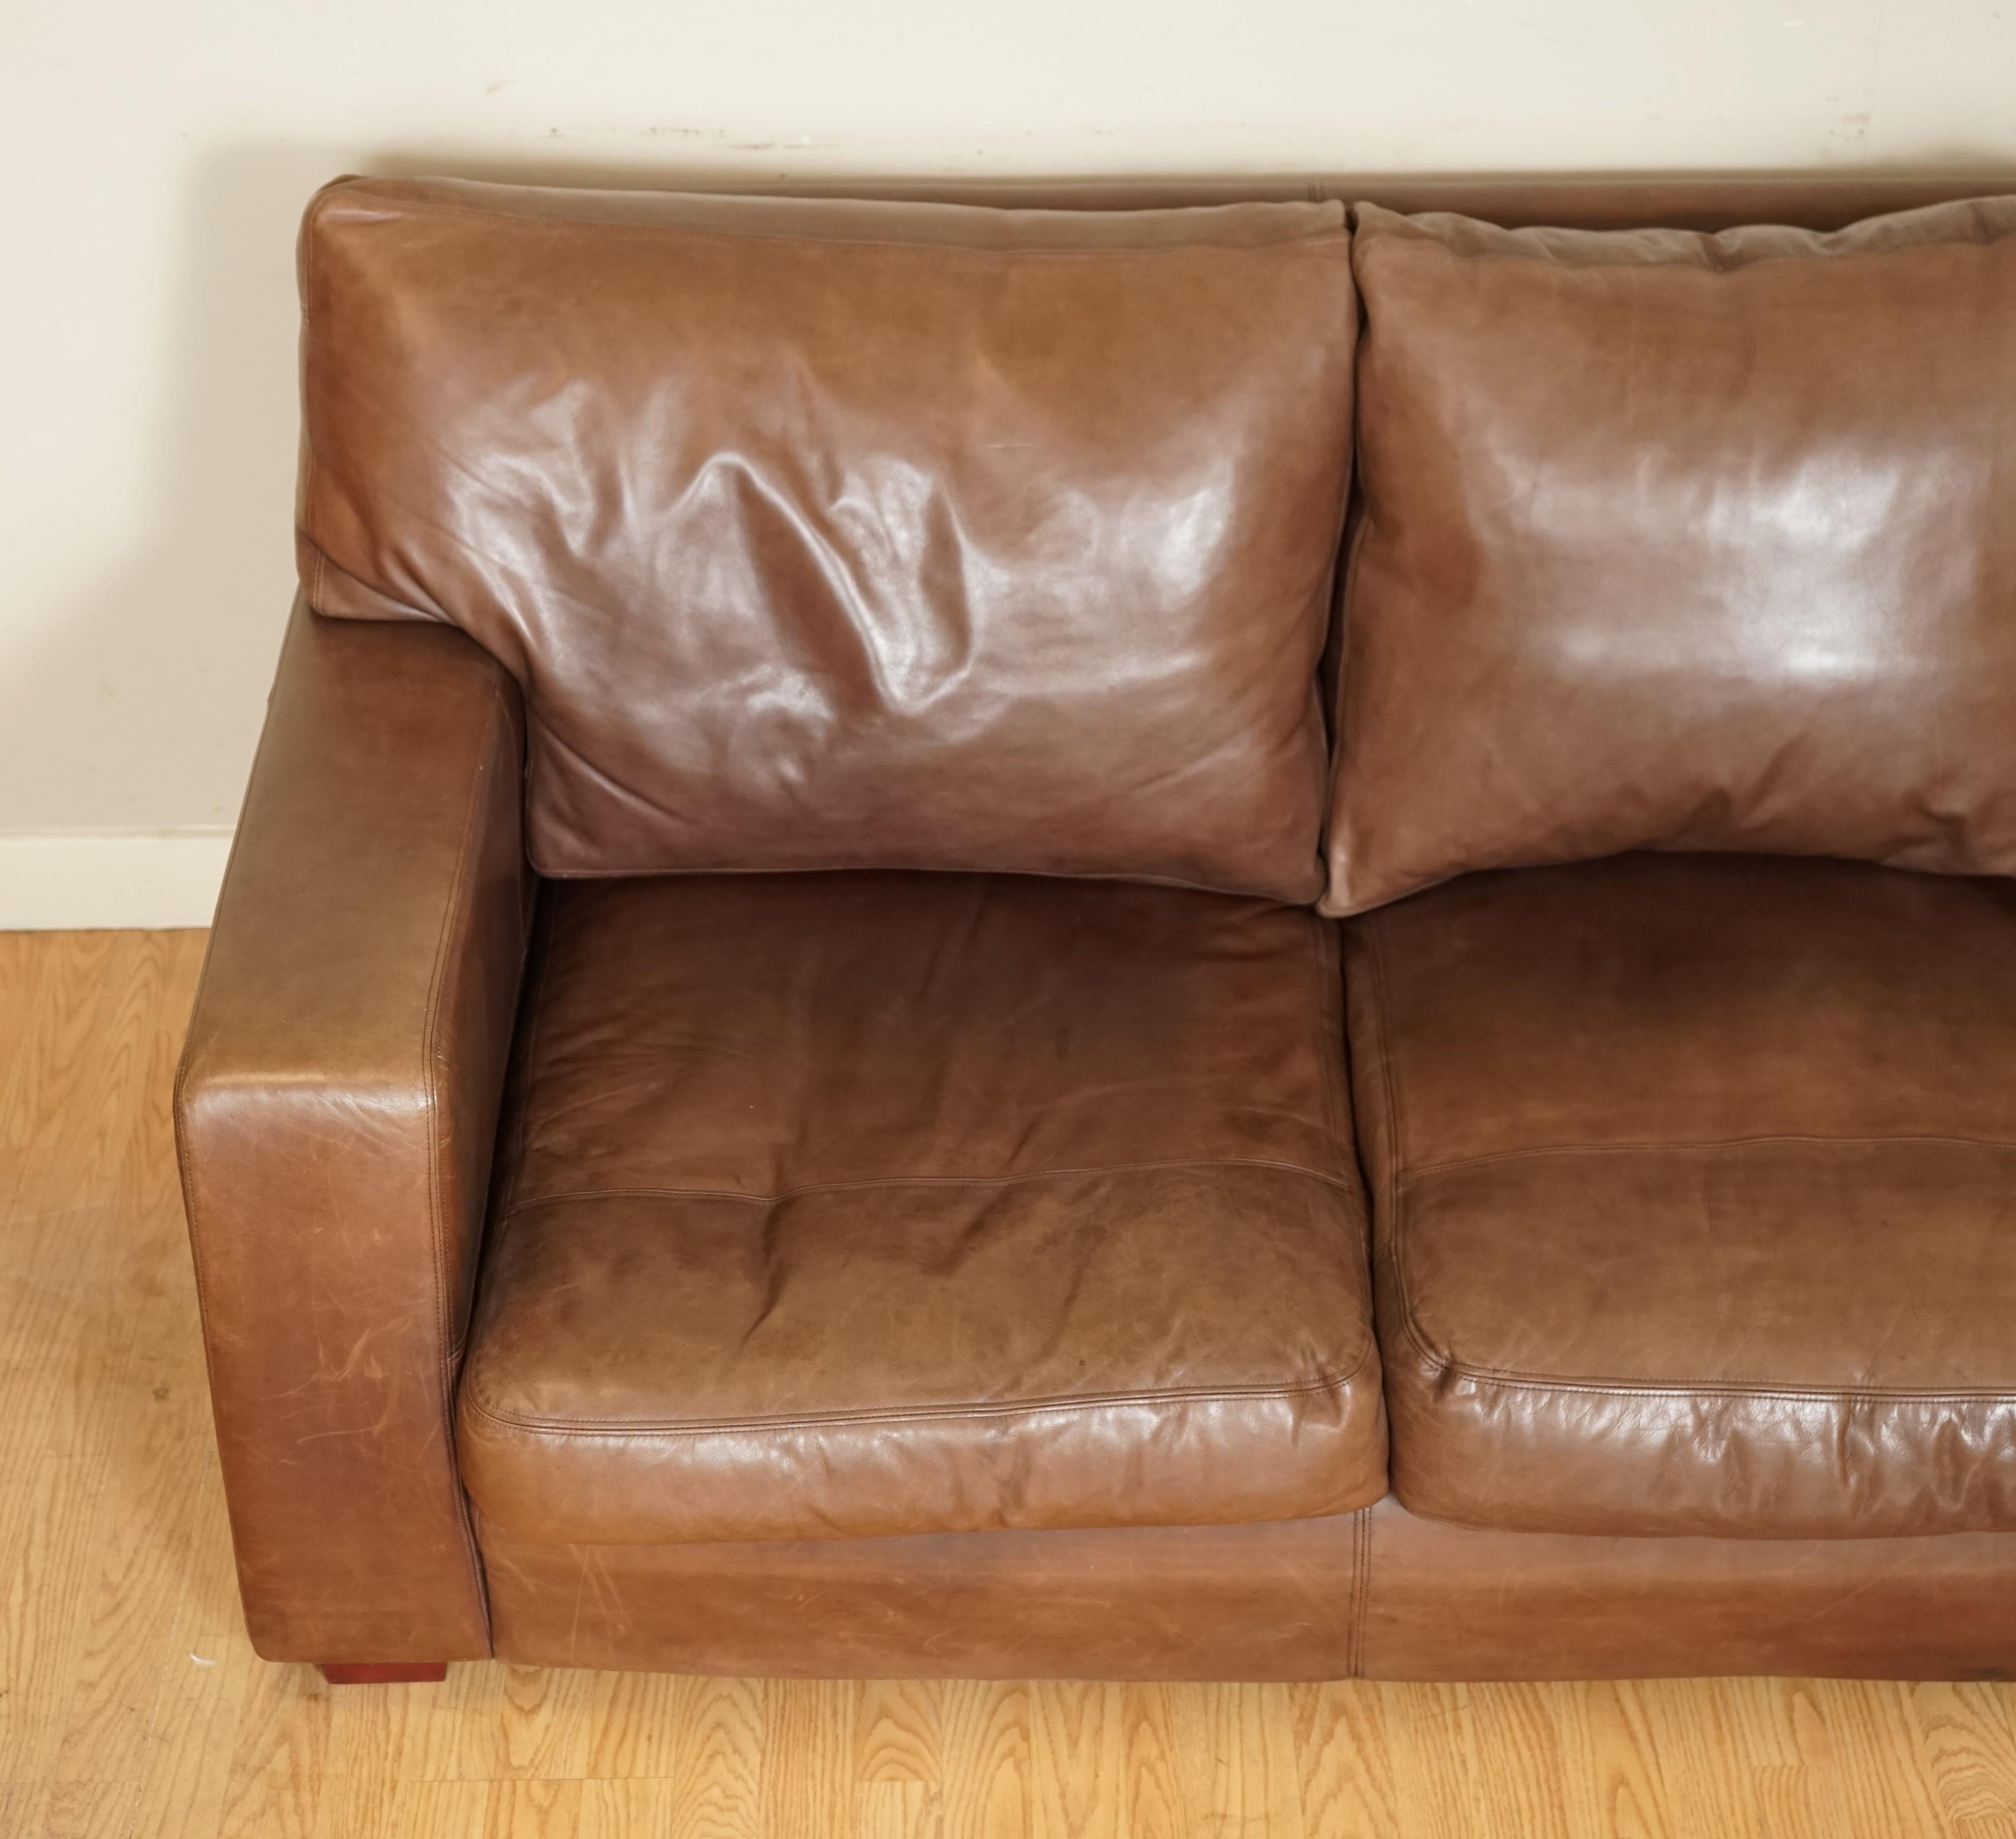 soft leather couch